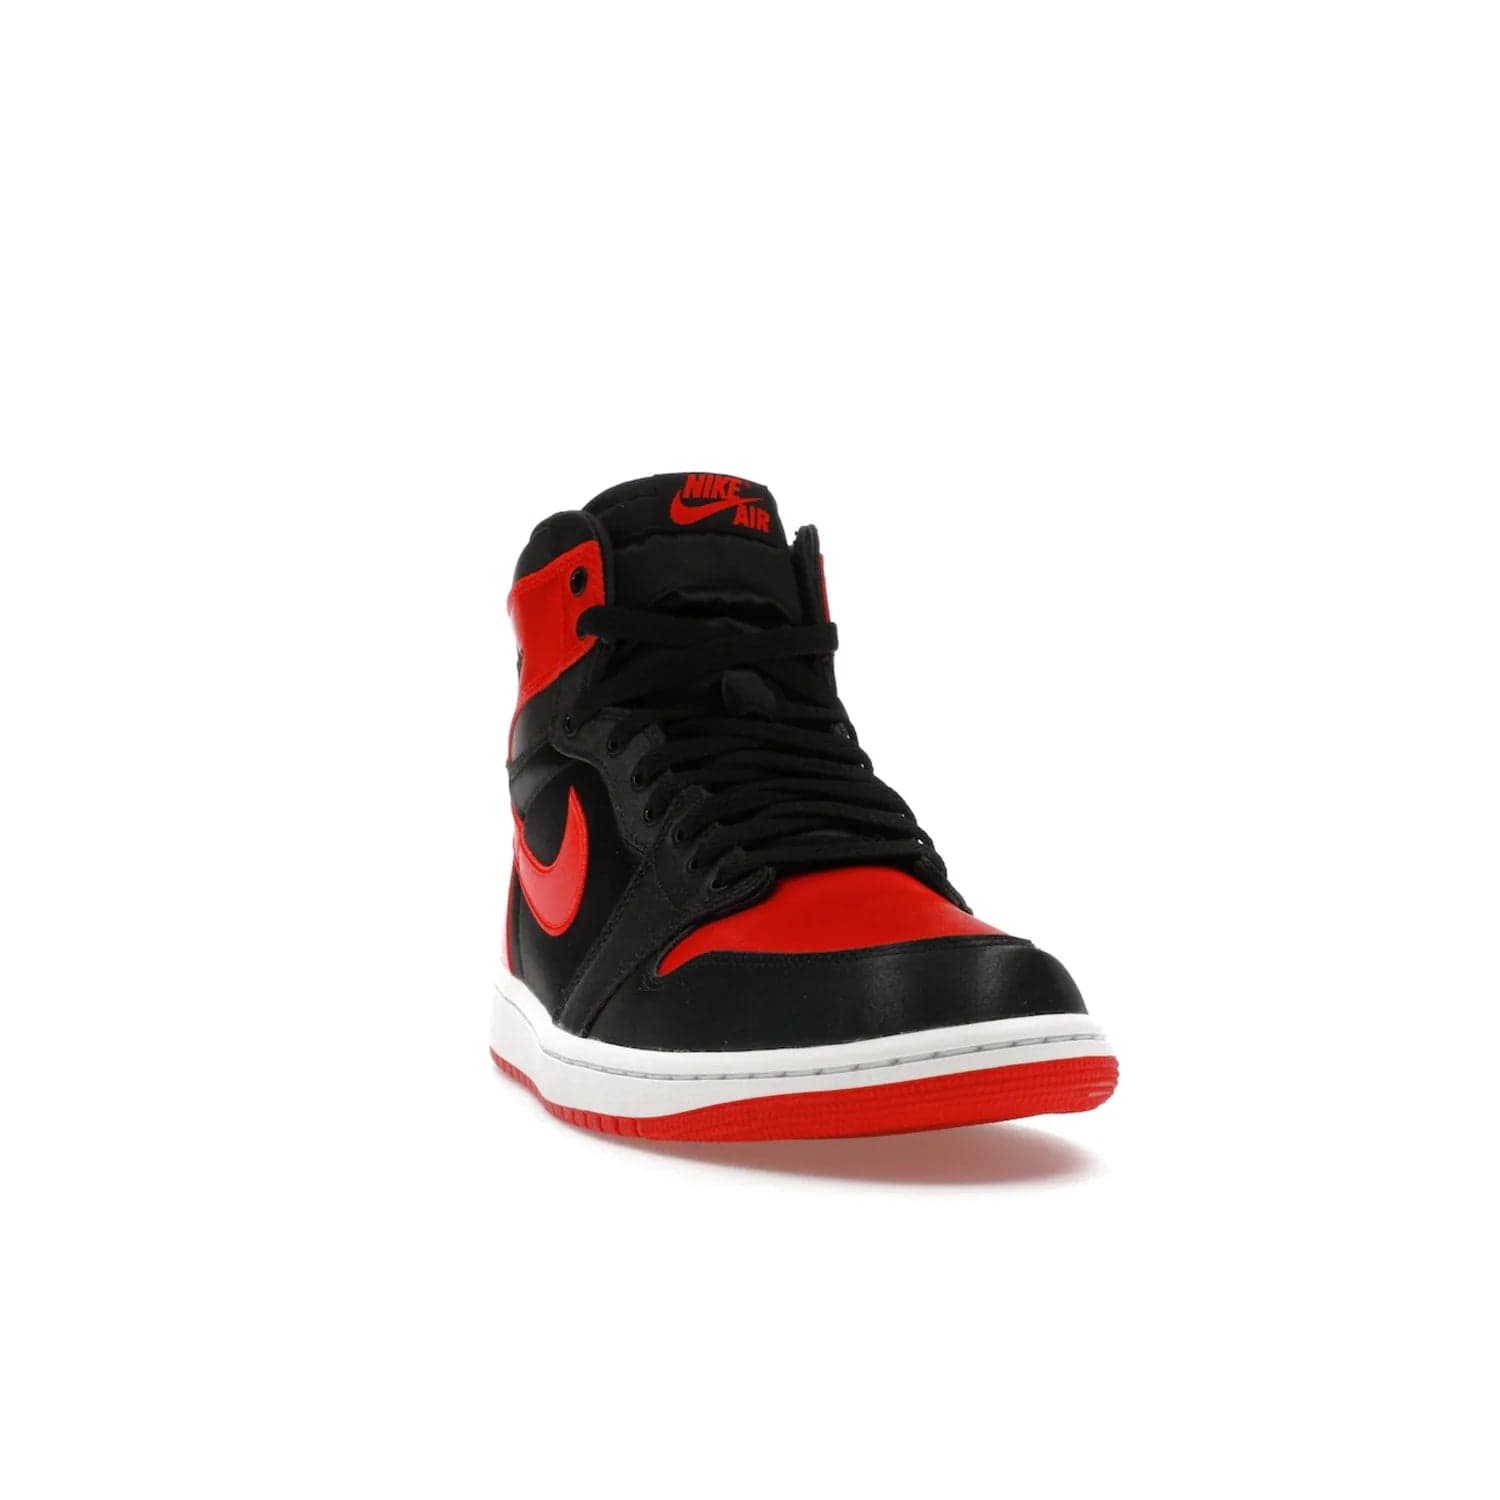 Jordan 1 Retro High OG Satin Bred (Women's) - Image 8 - Only at www.BallersClubKickz.com - Introducing the Jordan 1 Retro High OG Satin Bred (Women's). Luxe satin finish, contrasting hues & classic accents. Trending sneakers symbolizing timelessness & heritage. Make a bold statement with this iconic shoe. Available October 4, 2023.